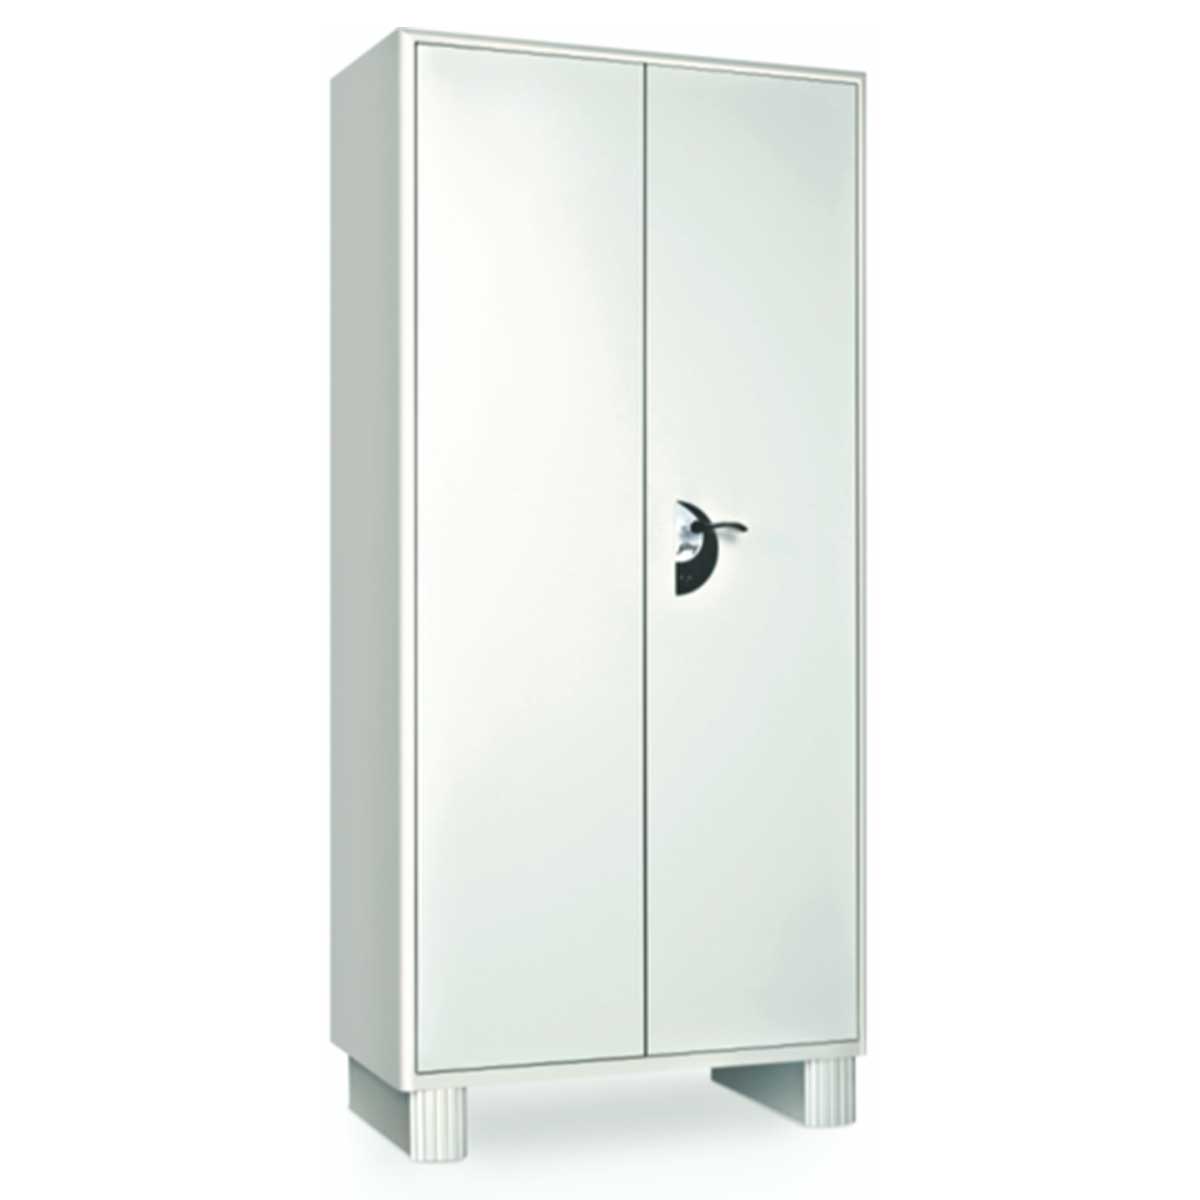 Cupboards Manufacturers, Suppliers in Noida Sector 92